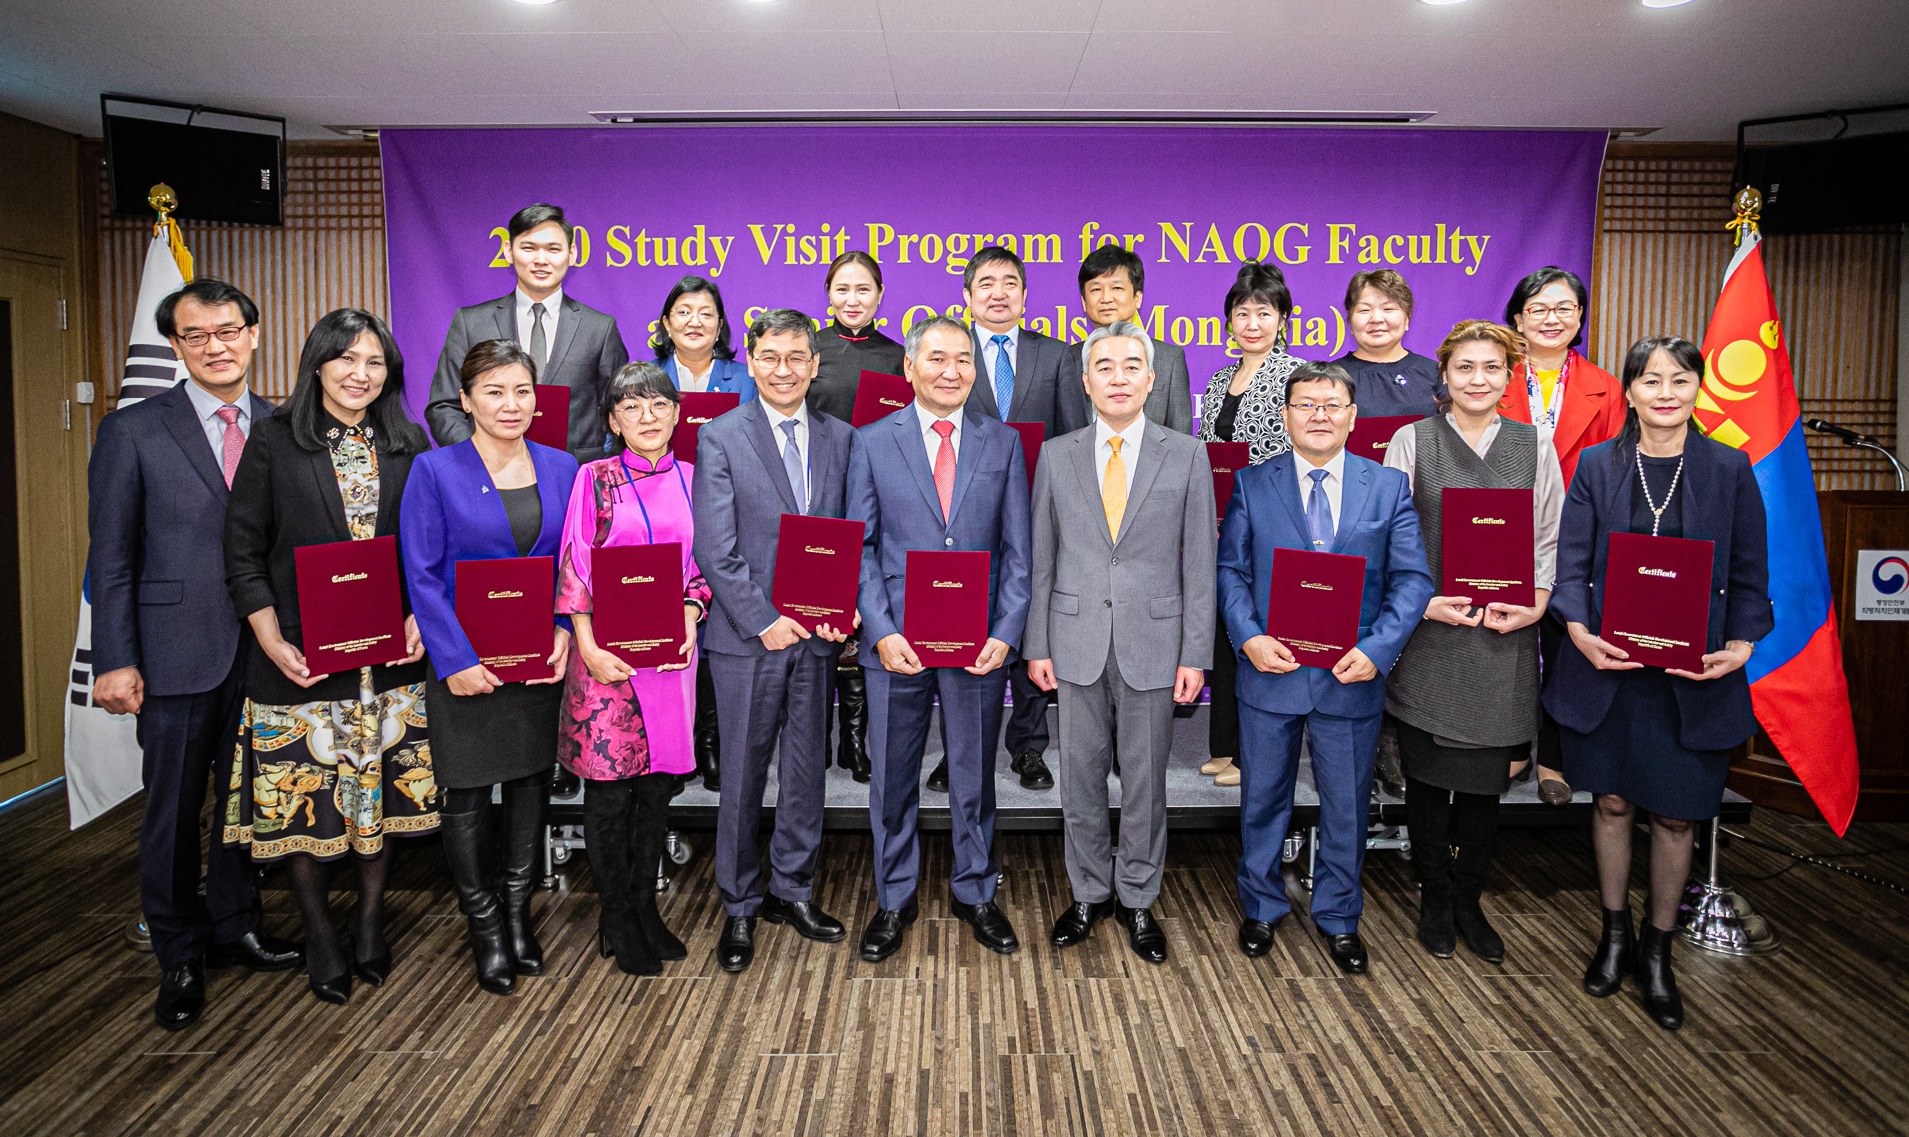 LOGODI concludes a one-week capacity building program for a delegation from Mongolia 큰 이미지[마우스 클릭 시 창닫기]